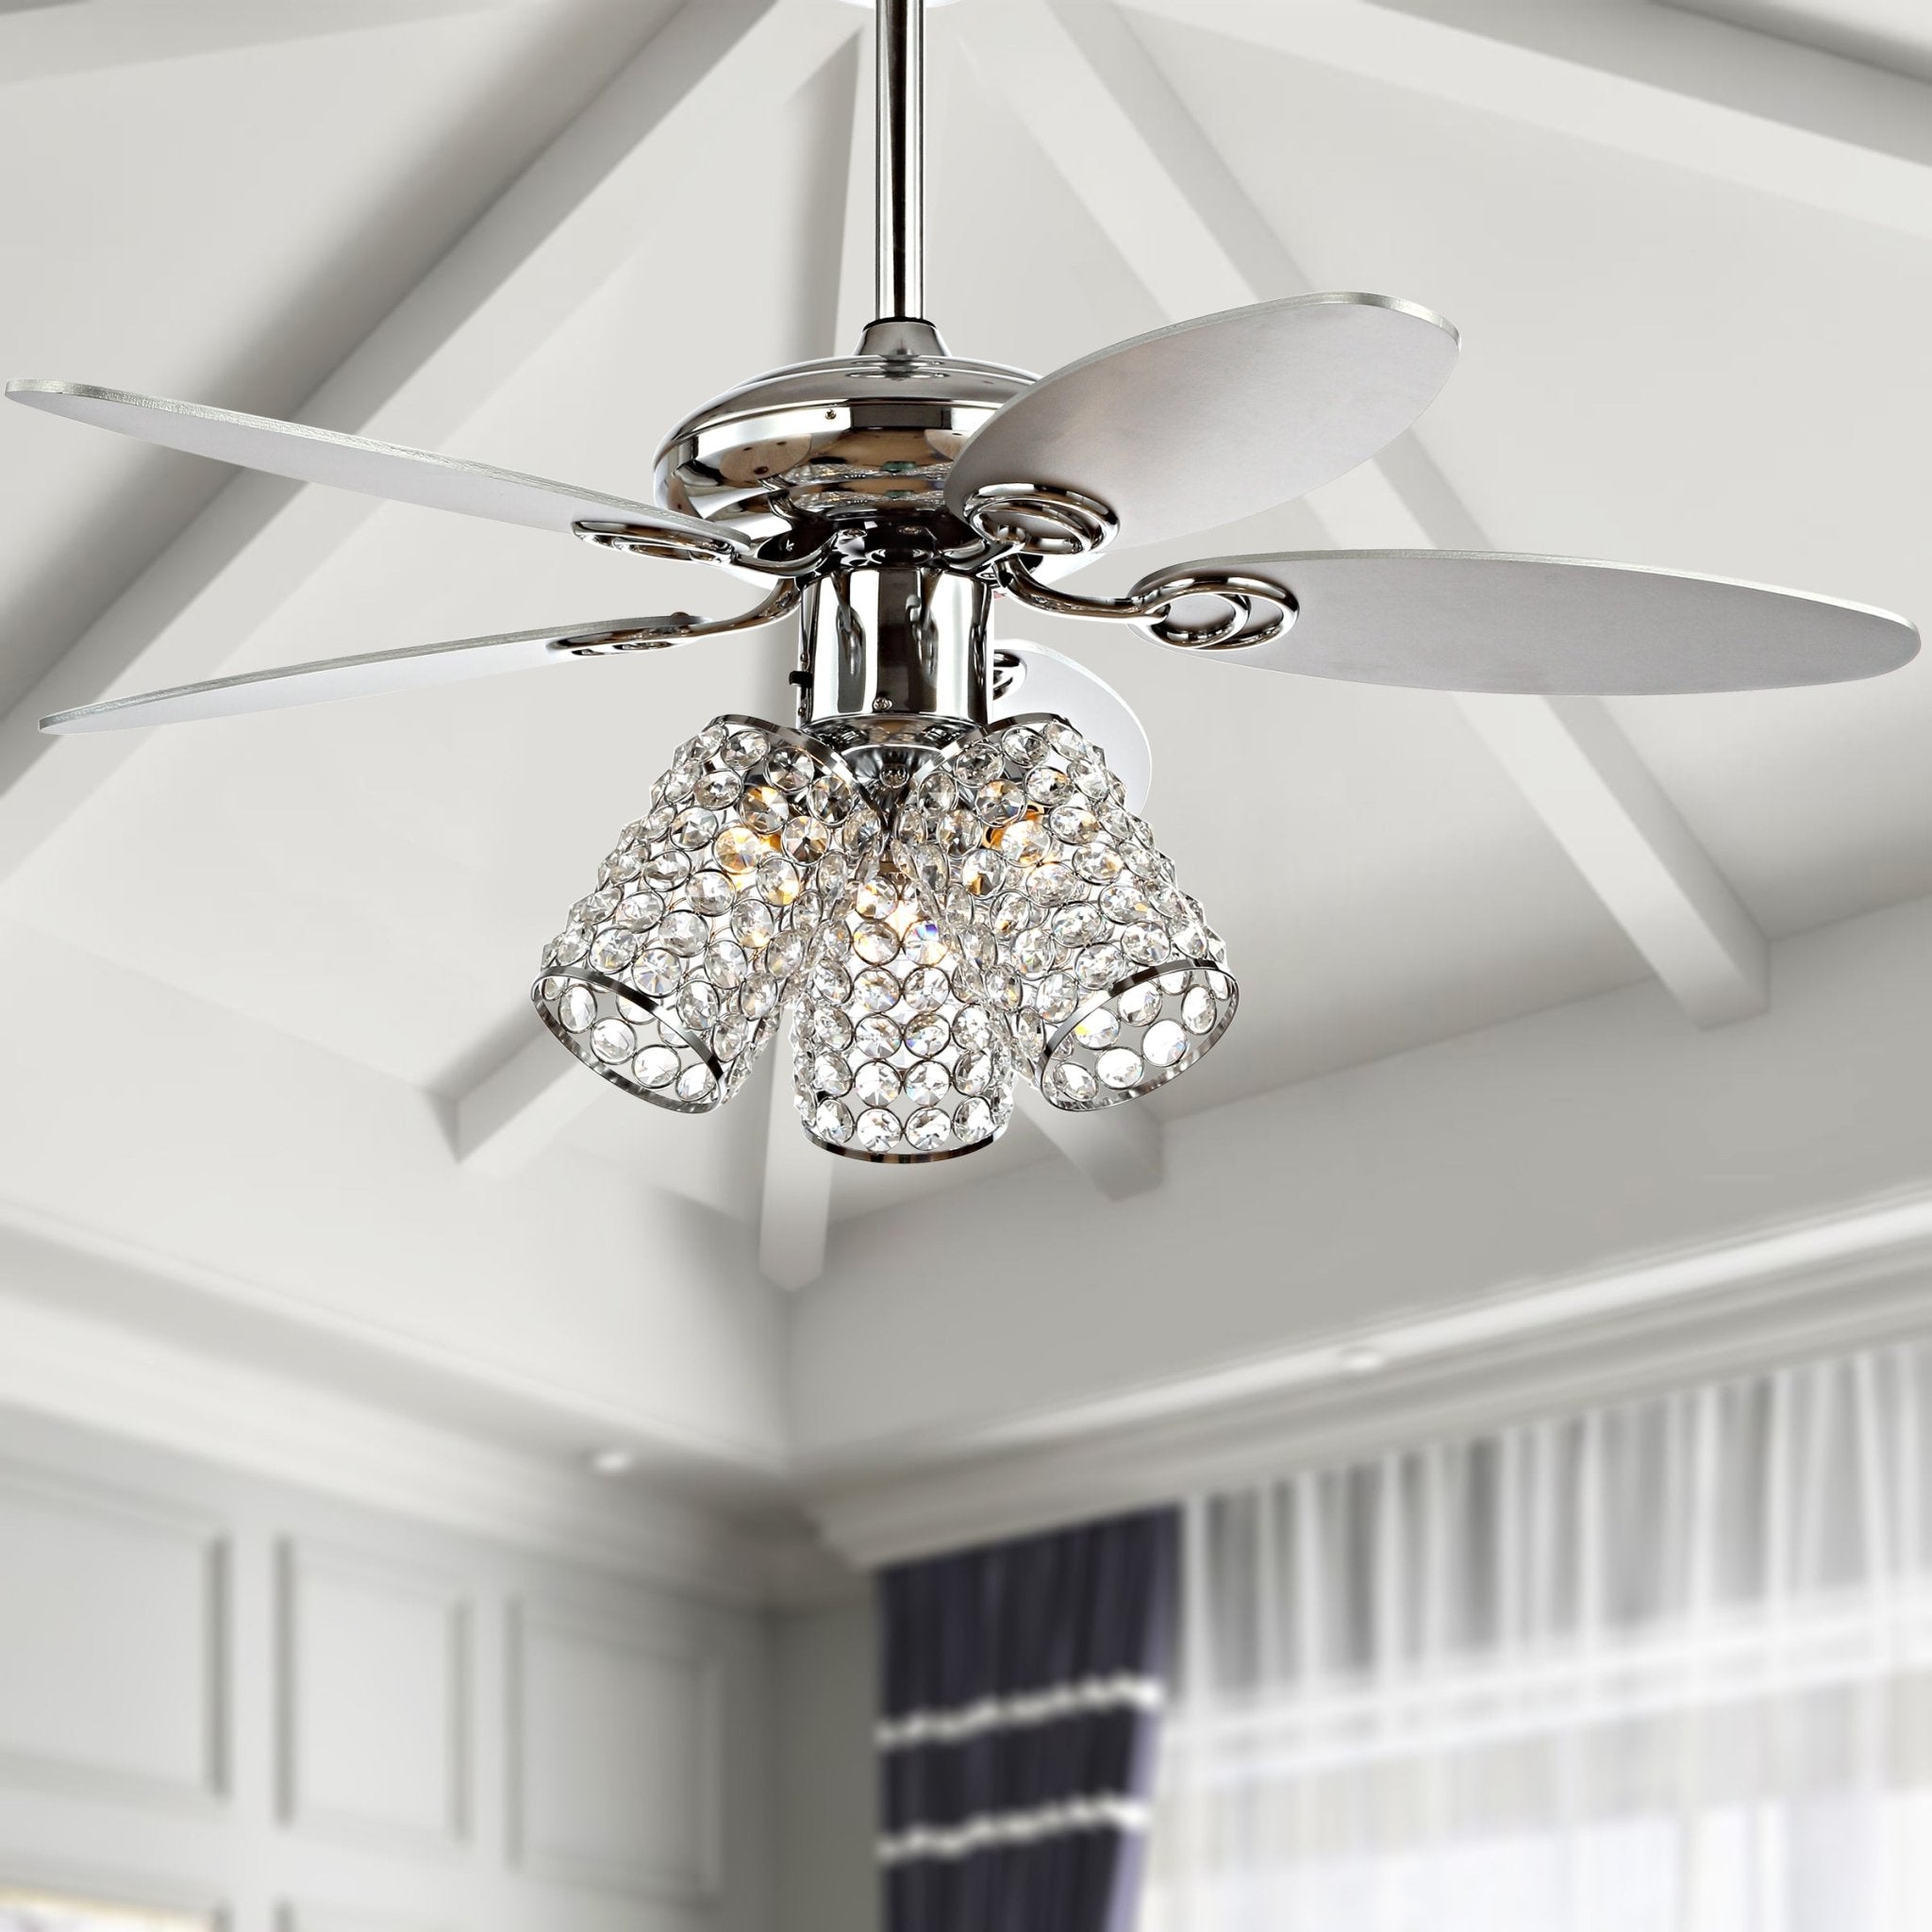 Kris-Light-Crystal-LED-Ceiling-Fan-With-Remote-Fans